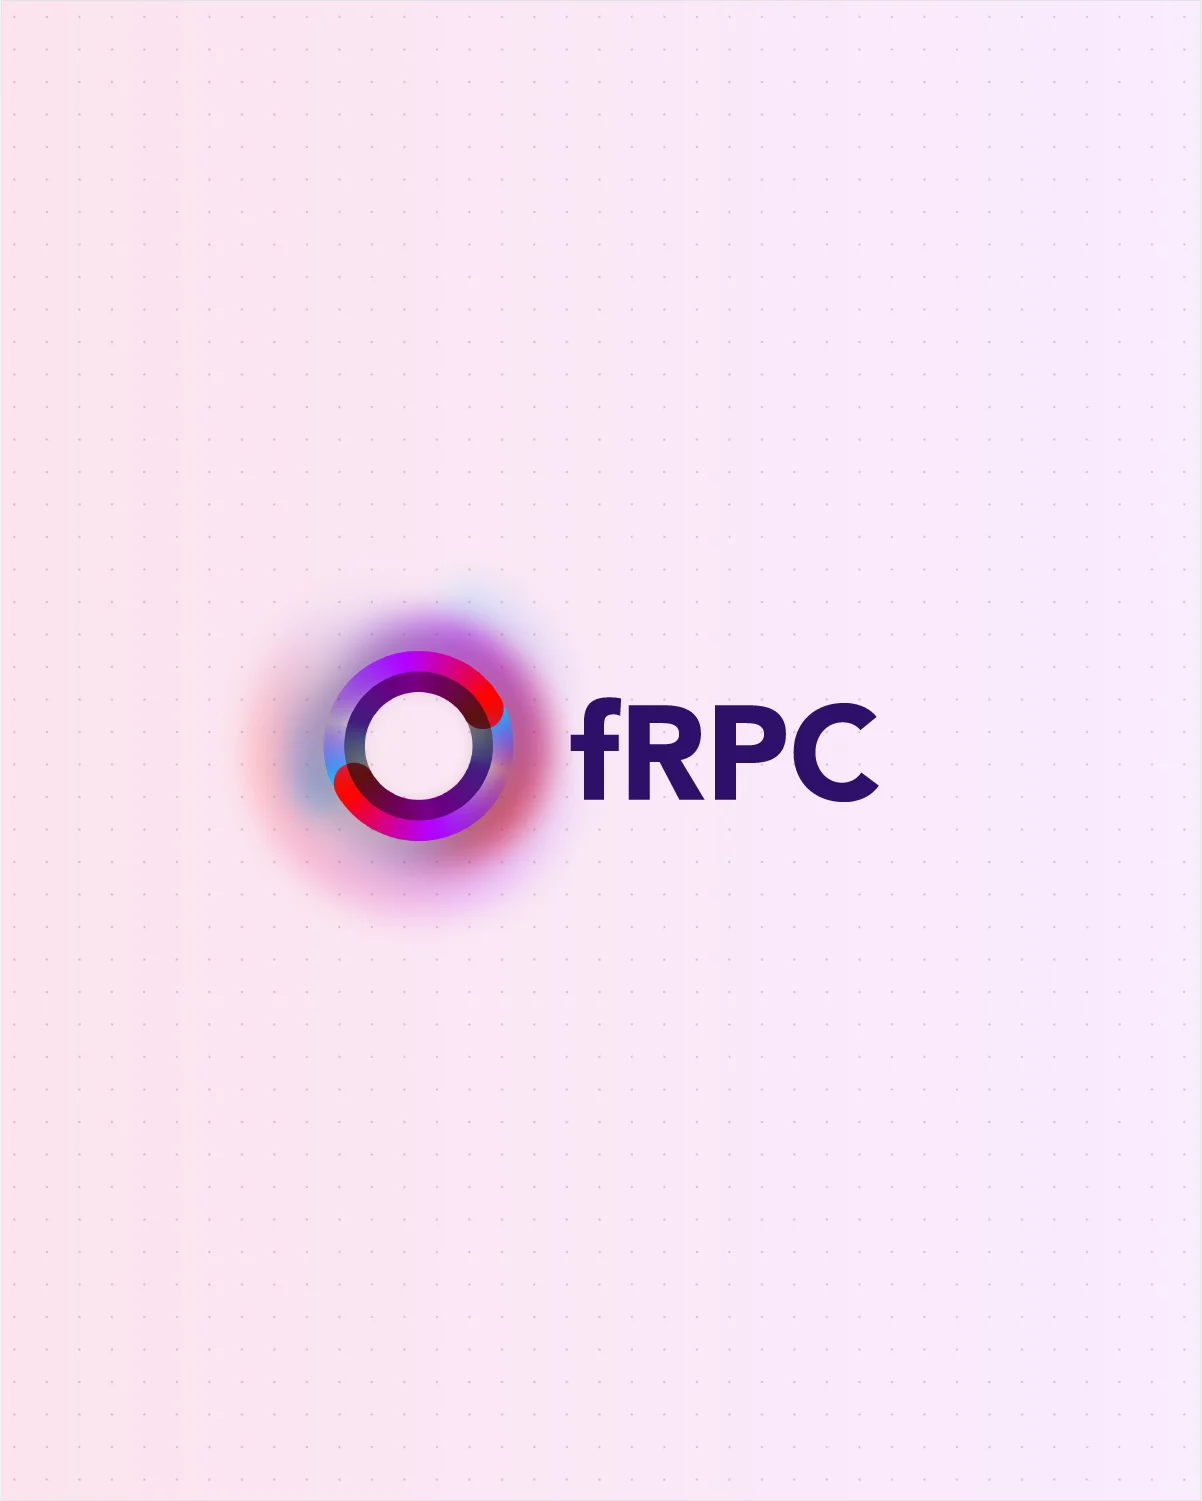 The fRPC logo: a circle of blue, purple, and red, as well as the letters FRPC in a dark purple.